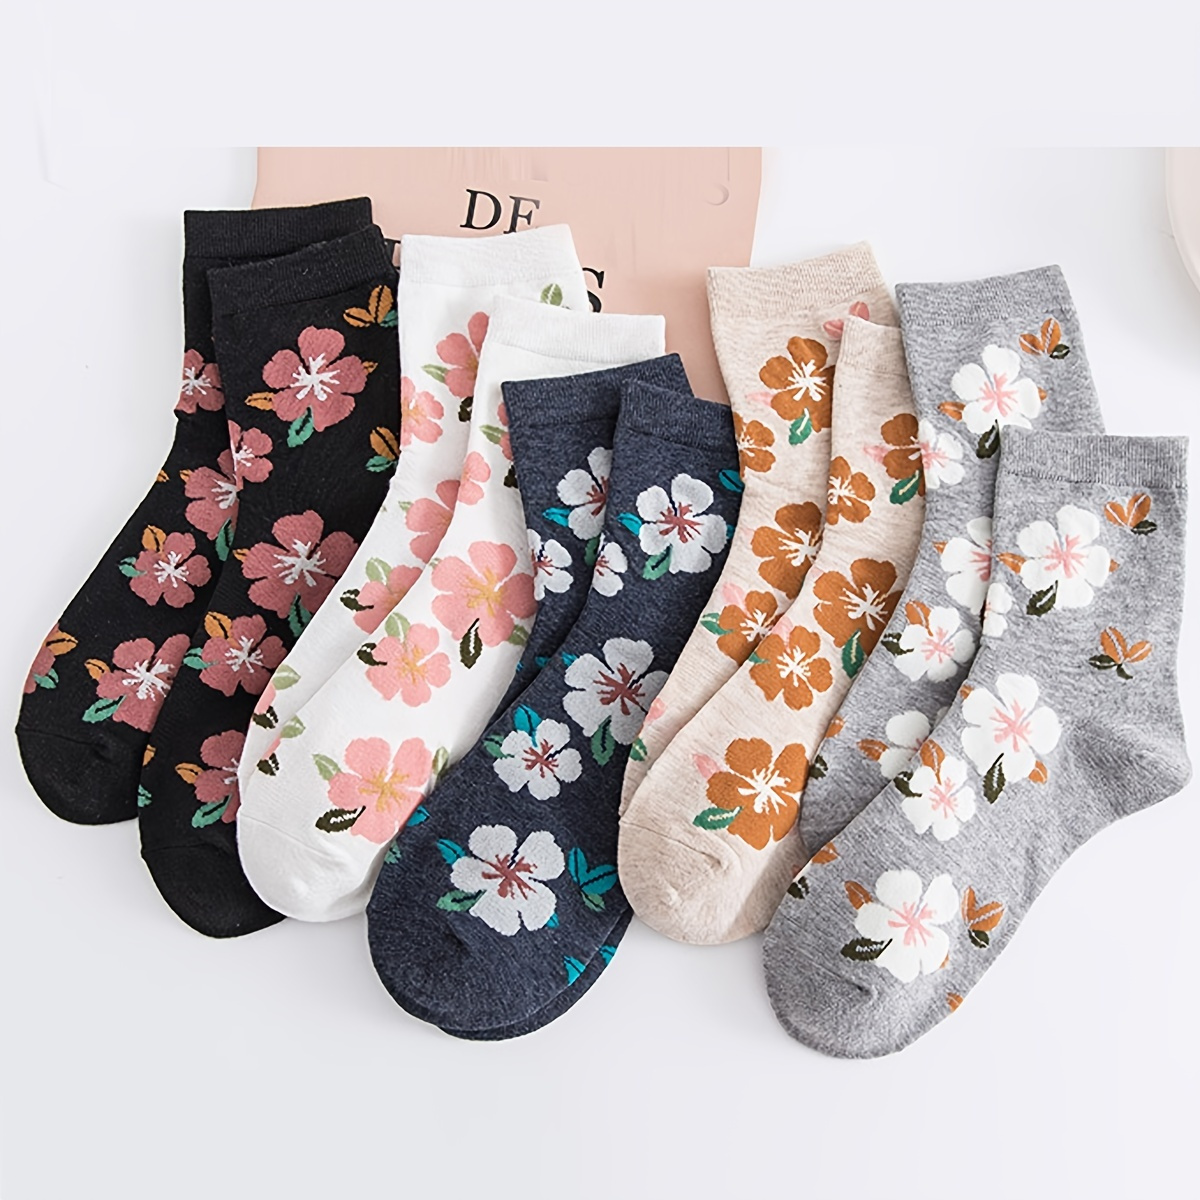  Kimkshine Floral Socks Women Nordic Textured Flower Cotton Socks,  Girls Vintage Cute Sweet Socks Novelty Ankle Crew Athletic Casual Socks with  Fancy Embroidered pattern 6 pairs : Clothing, Shoes & Jewelry